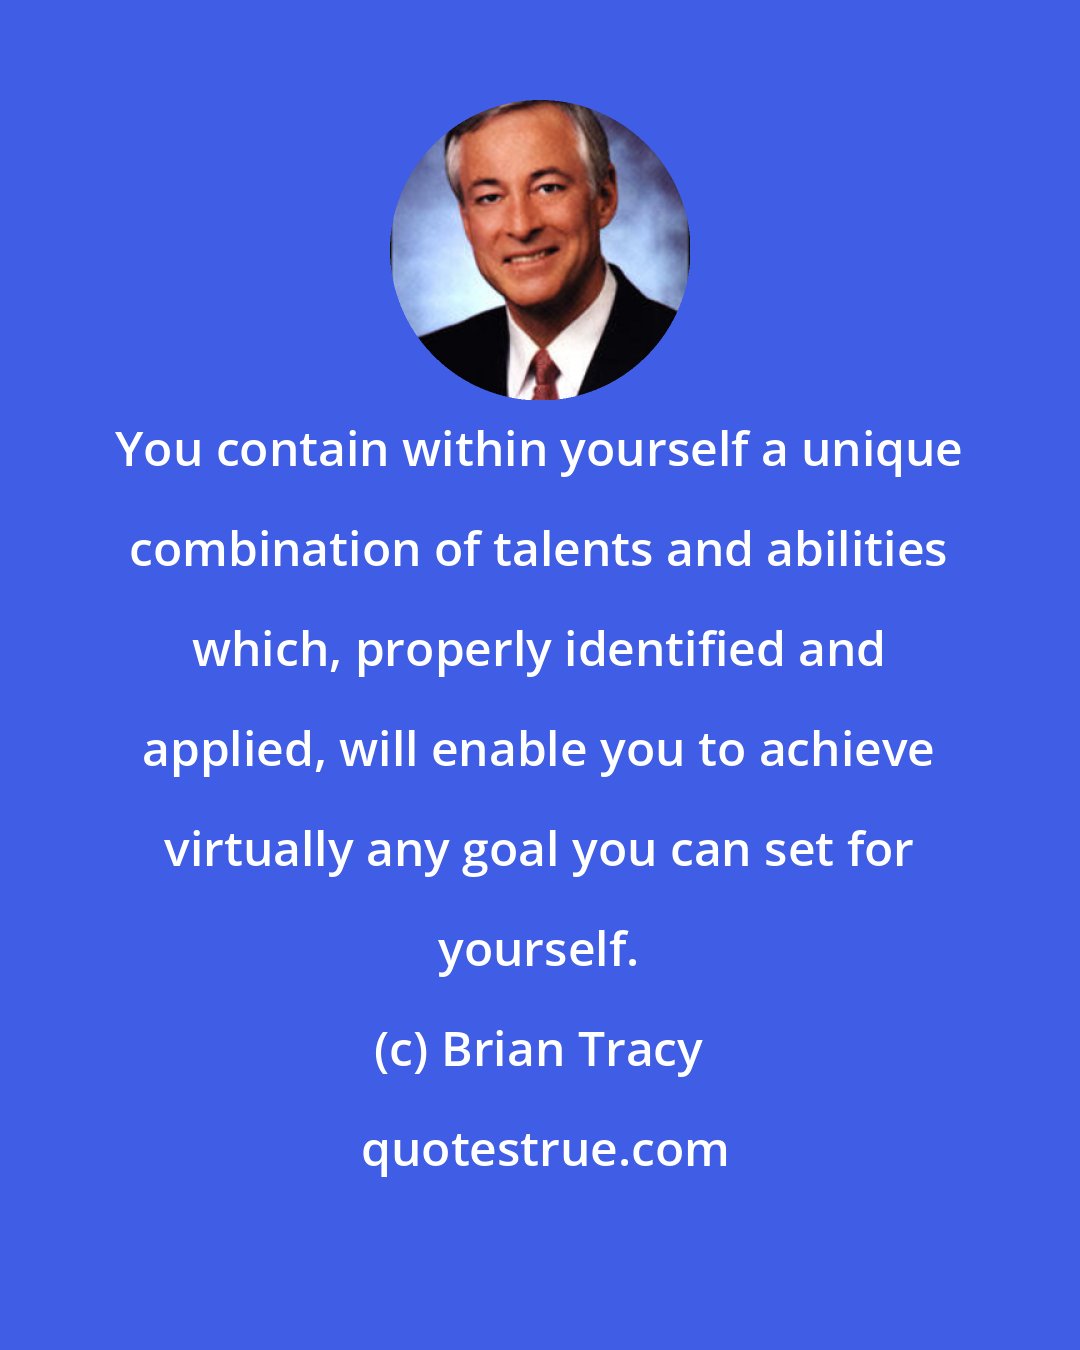 Brian Tracy: You contain within yourself a unique combination of talents and abilities which, properly identified and applied, will enable you to achieve virtually any goal you can set for yourself.